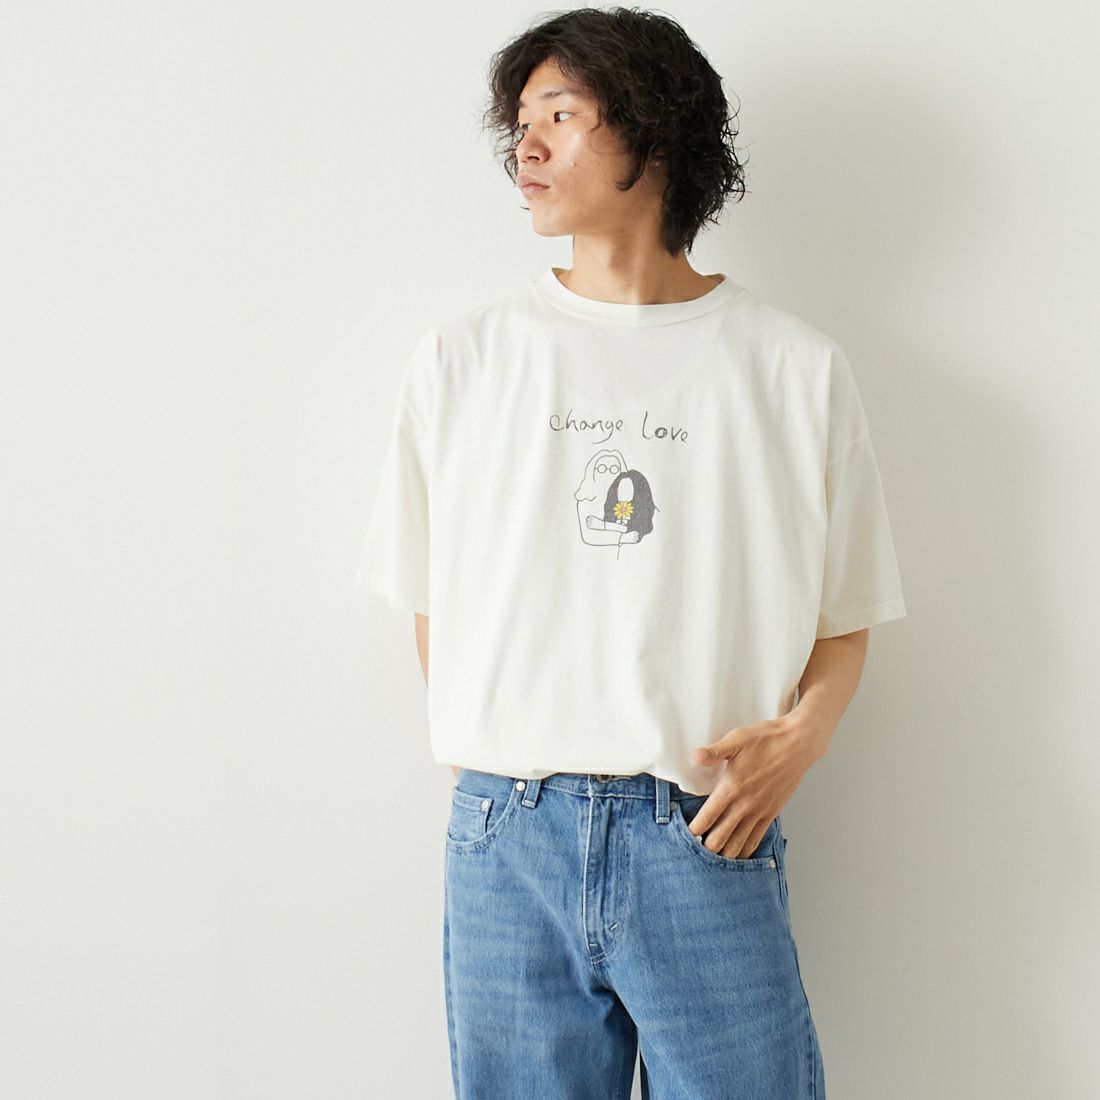 REMI RELIEF [レミレリーフ] 別注 20天竺プリントTシャツ CHANGE 